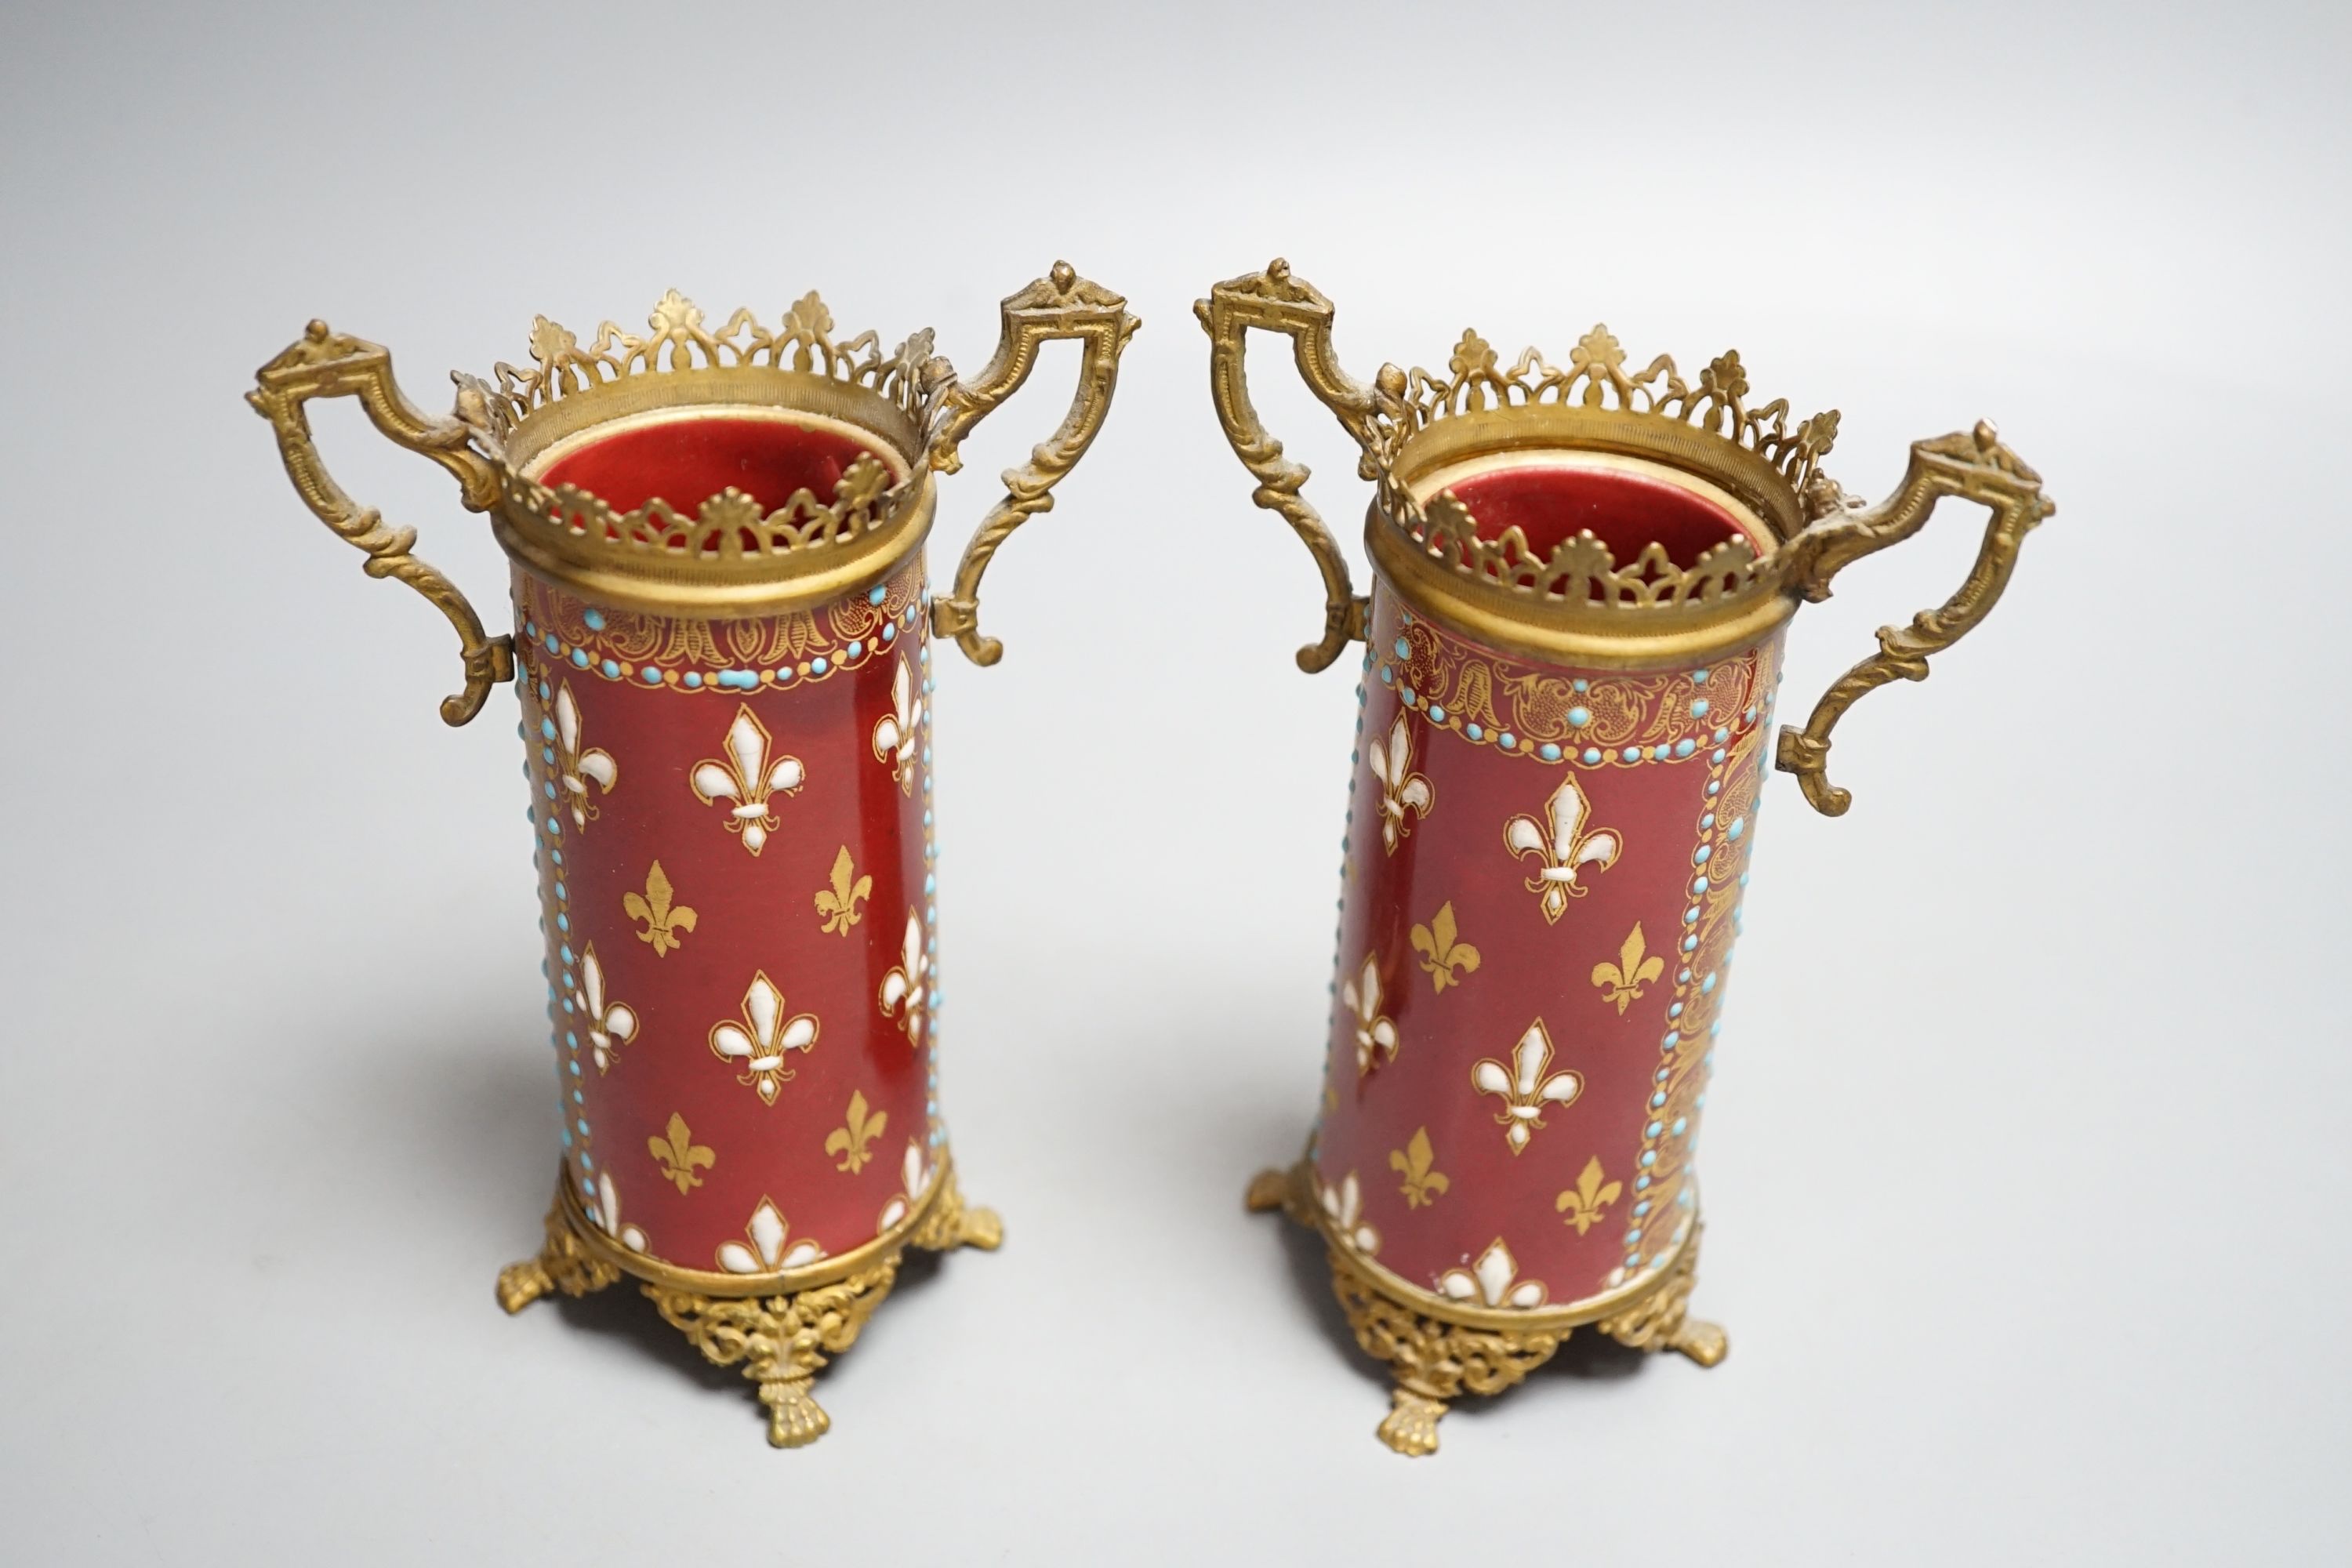 A pair of German or Austrian jewelled porcelain gilt metal mounted vases - 13cm tall